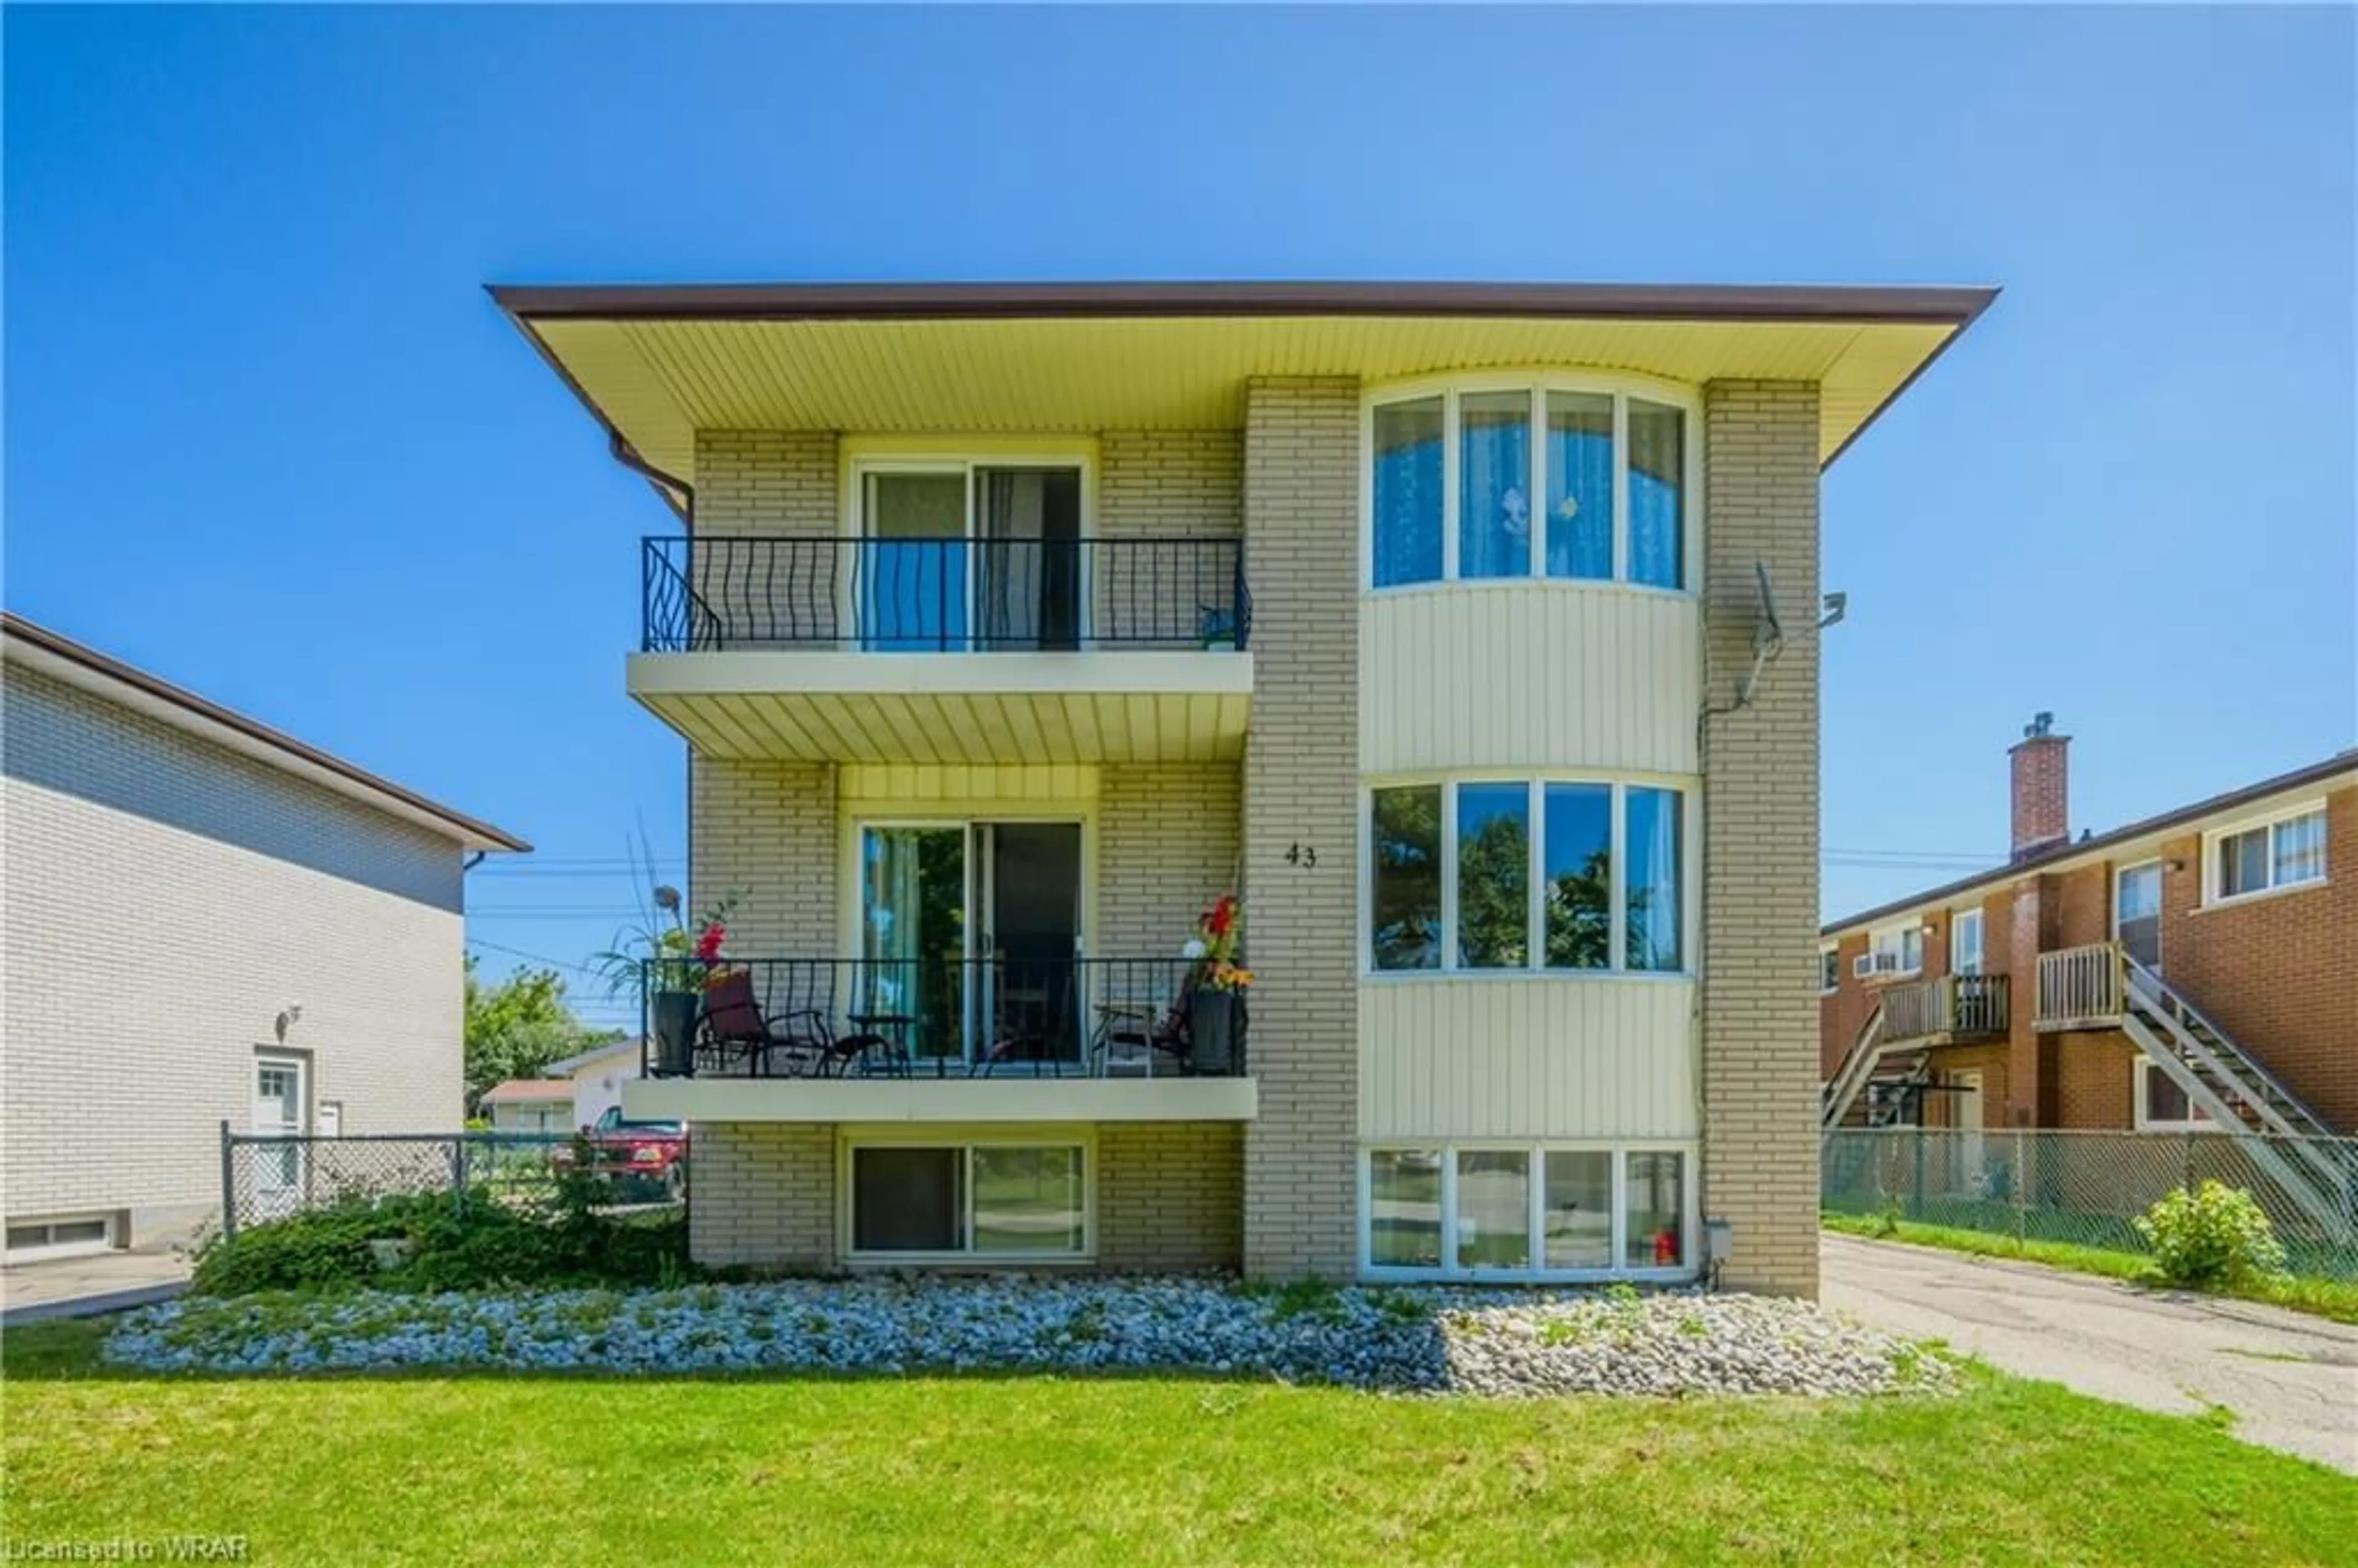 Frontside or backside of a home for 43 Secord Ave, Kitchener Ontario N2B 2L3